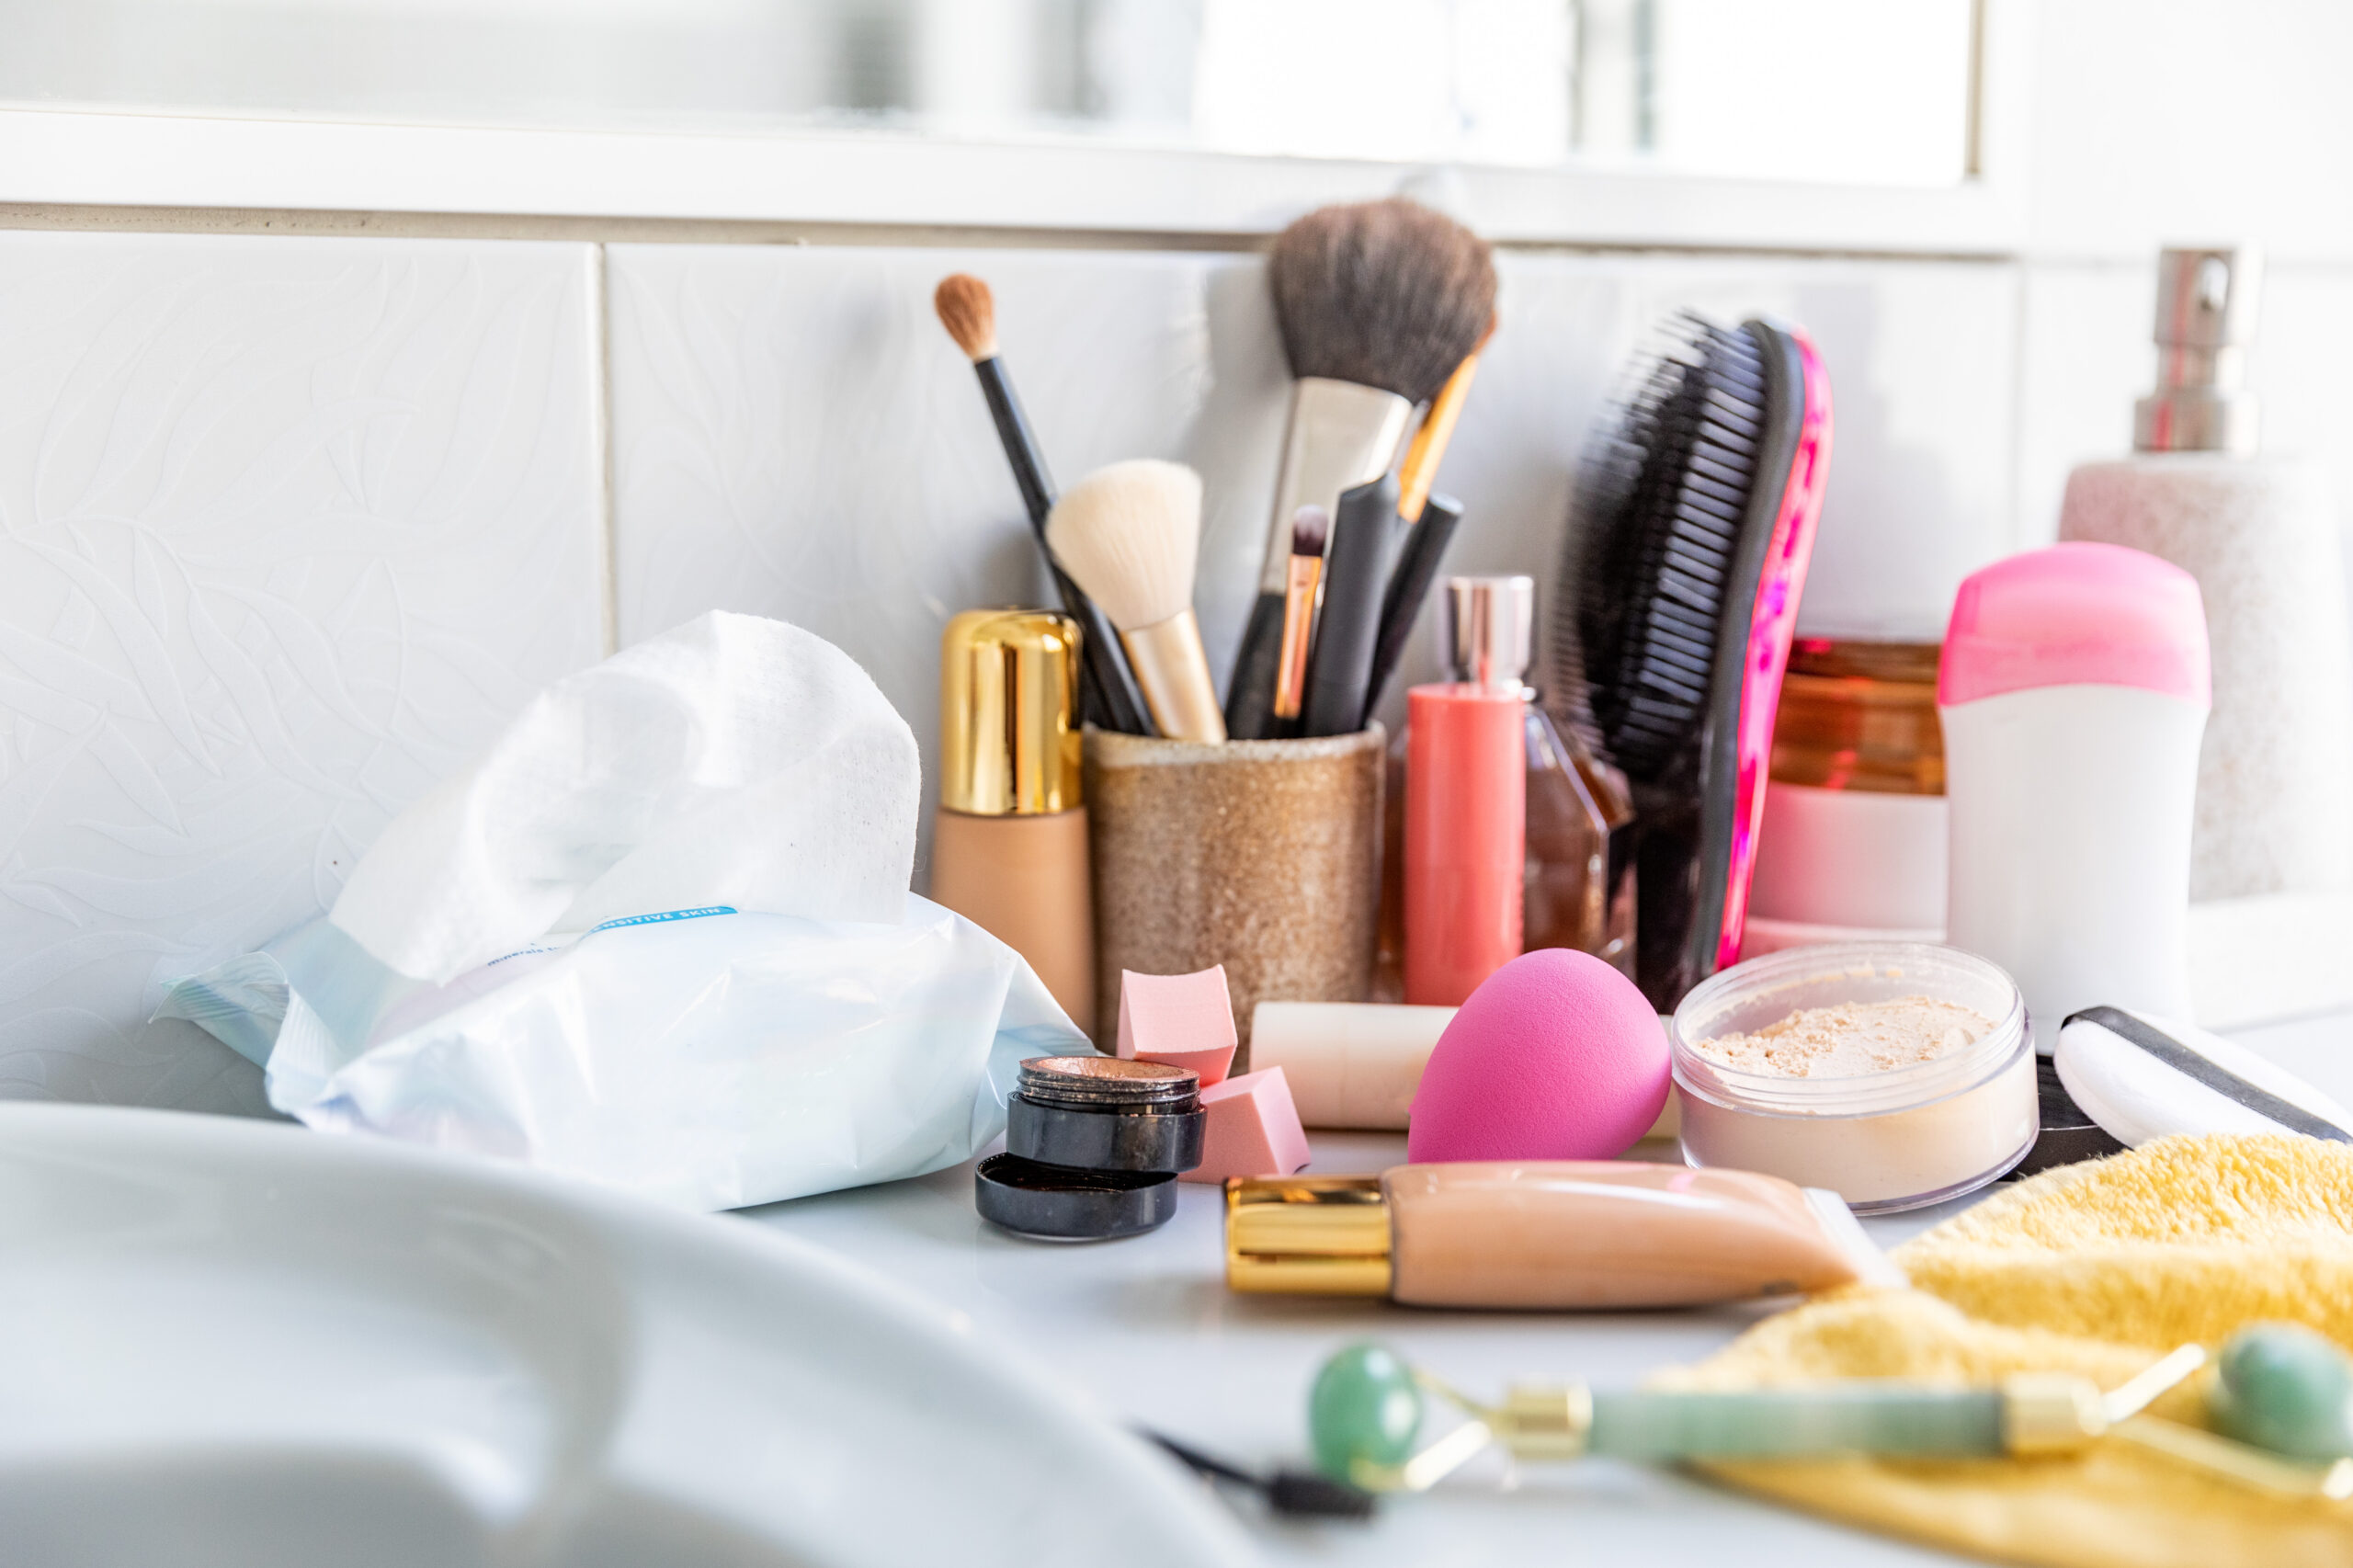 An Expert Shares The Best Way To Clean Your Makeup Brushes